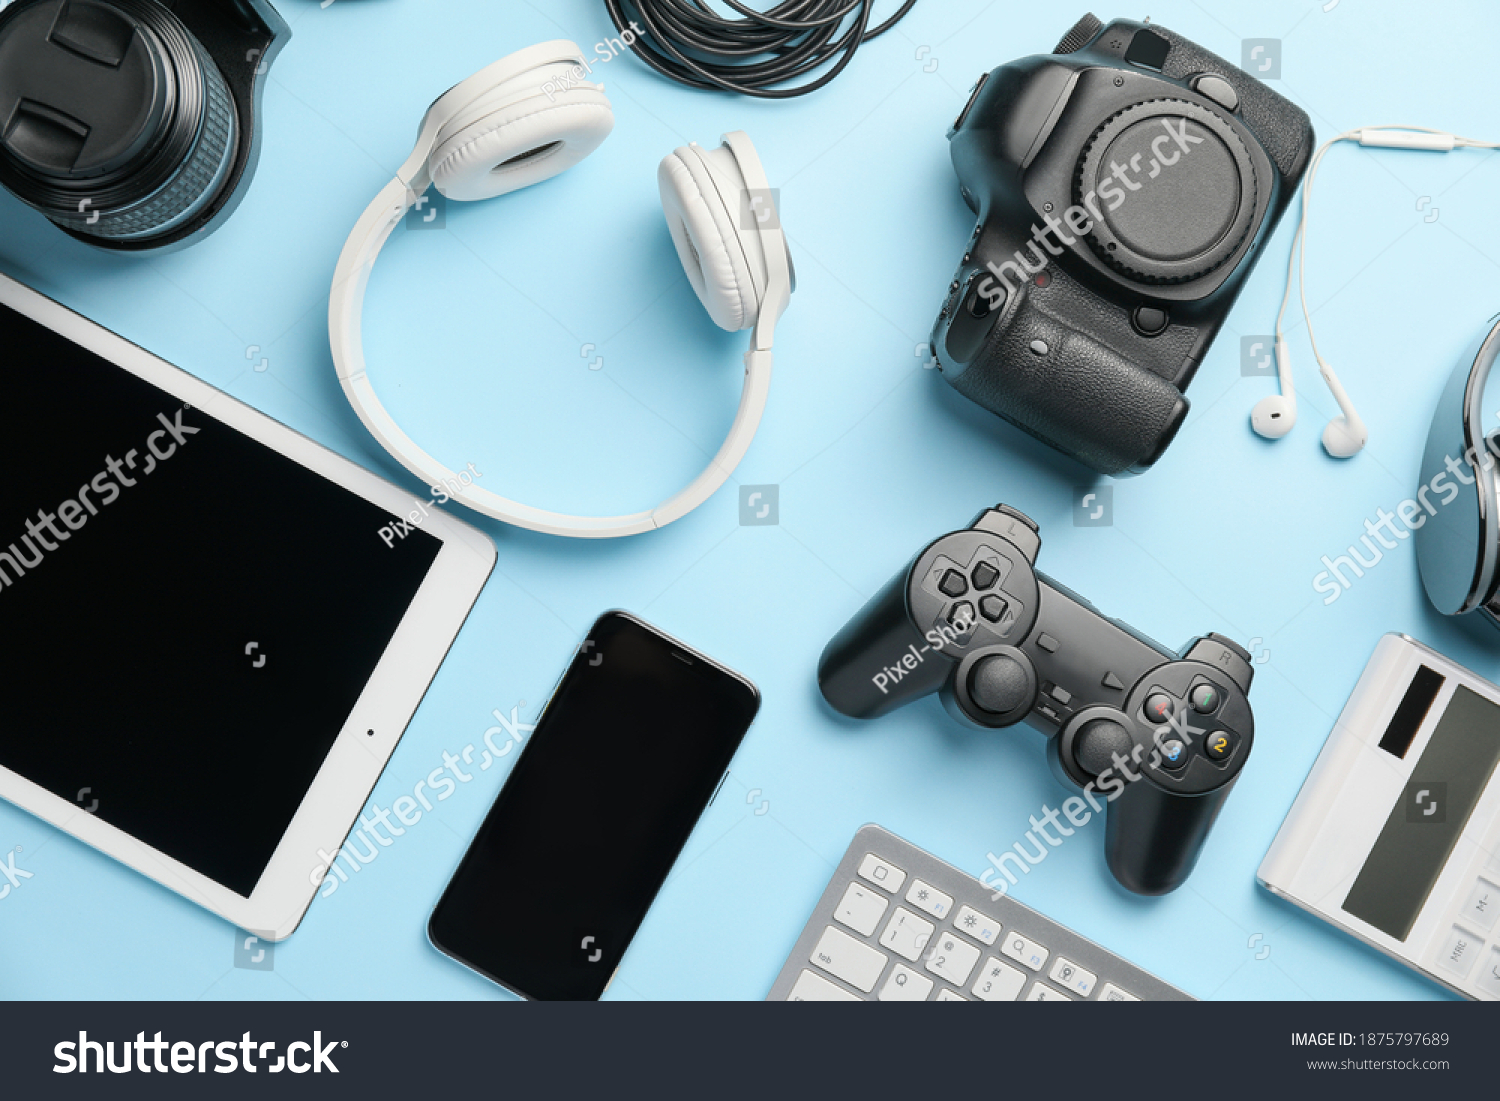 Different modern devices on color background #1875797689